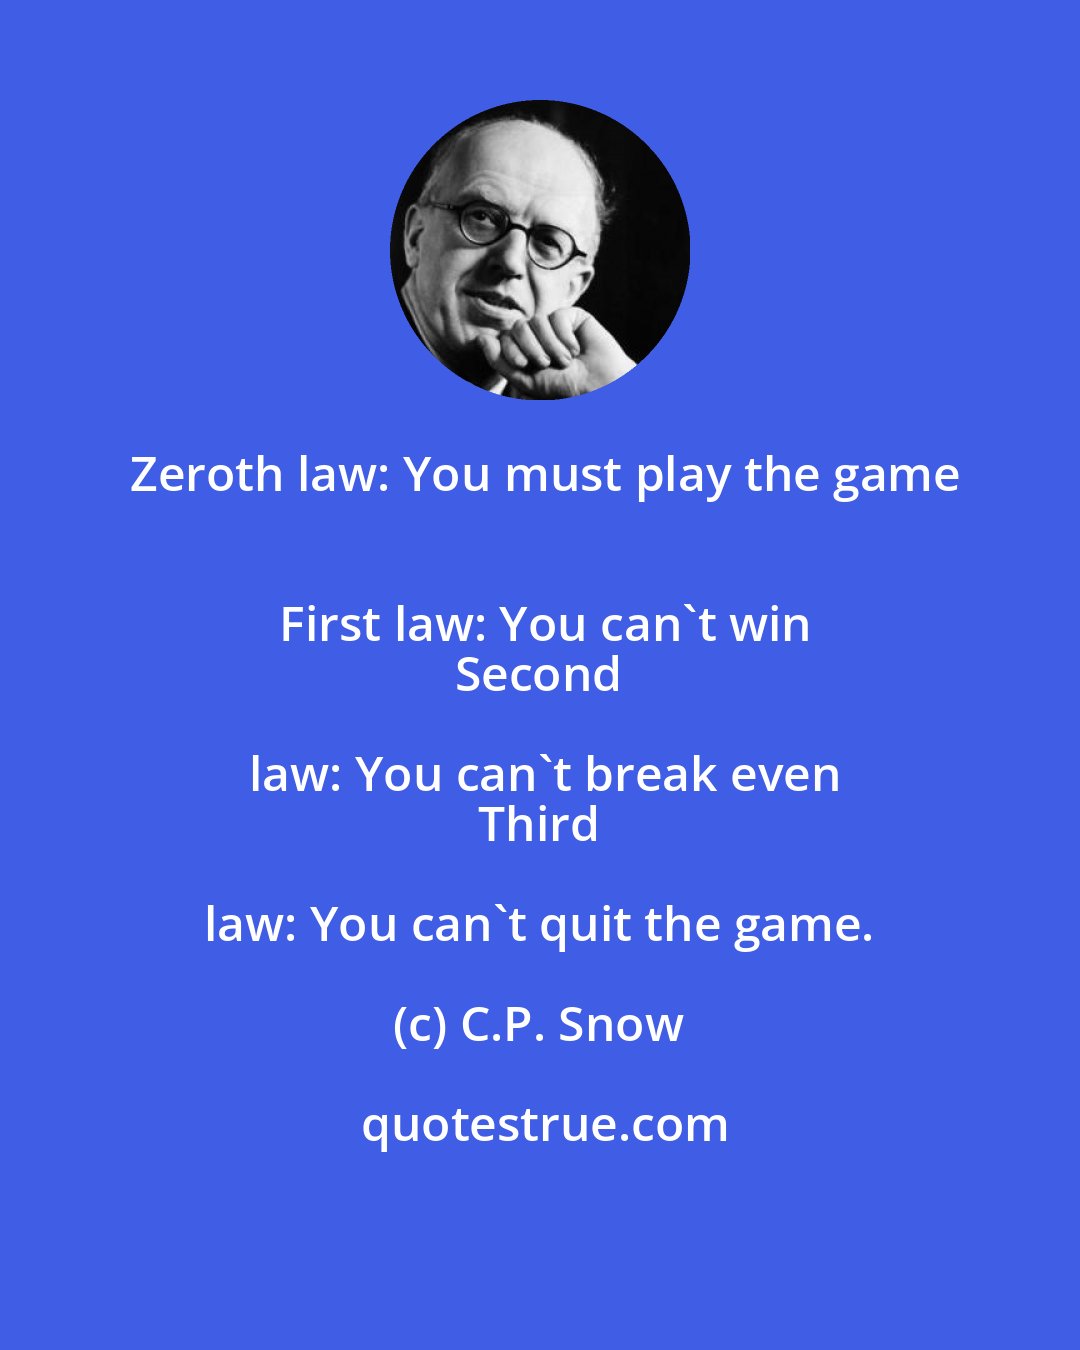 C.P. Snow: Zeroth law: You must play the game
 First law: You can't win
 Second law: You can't break even
 Third law: You can't quit the game.